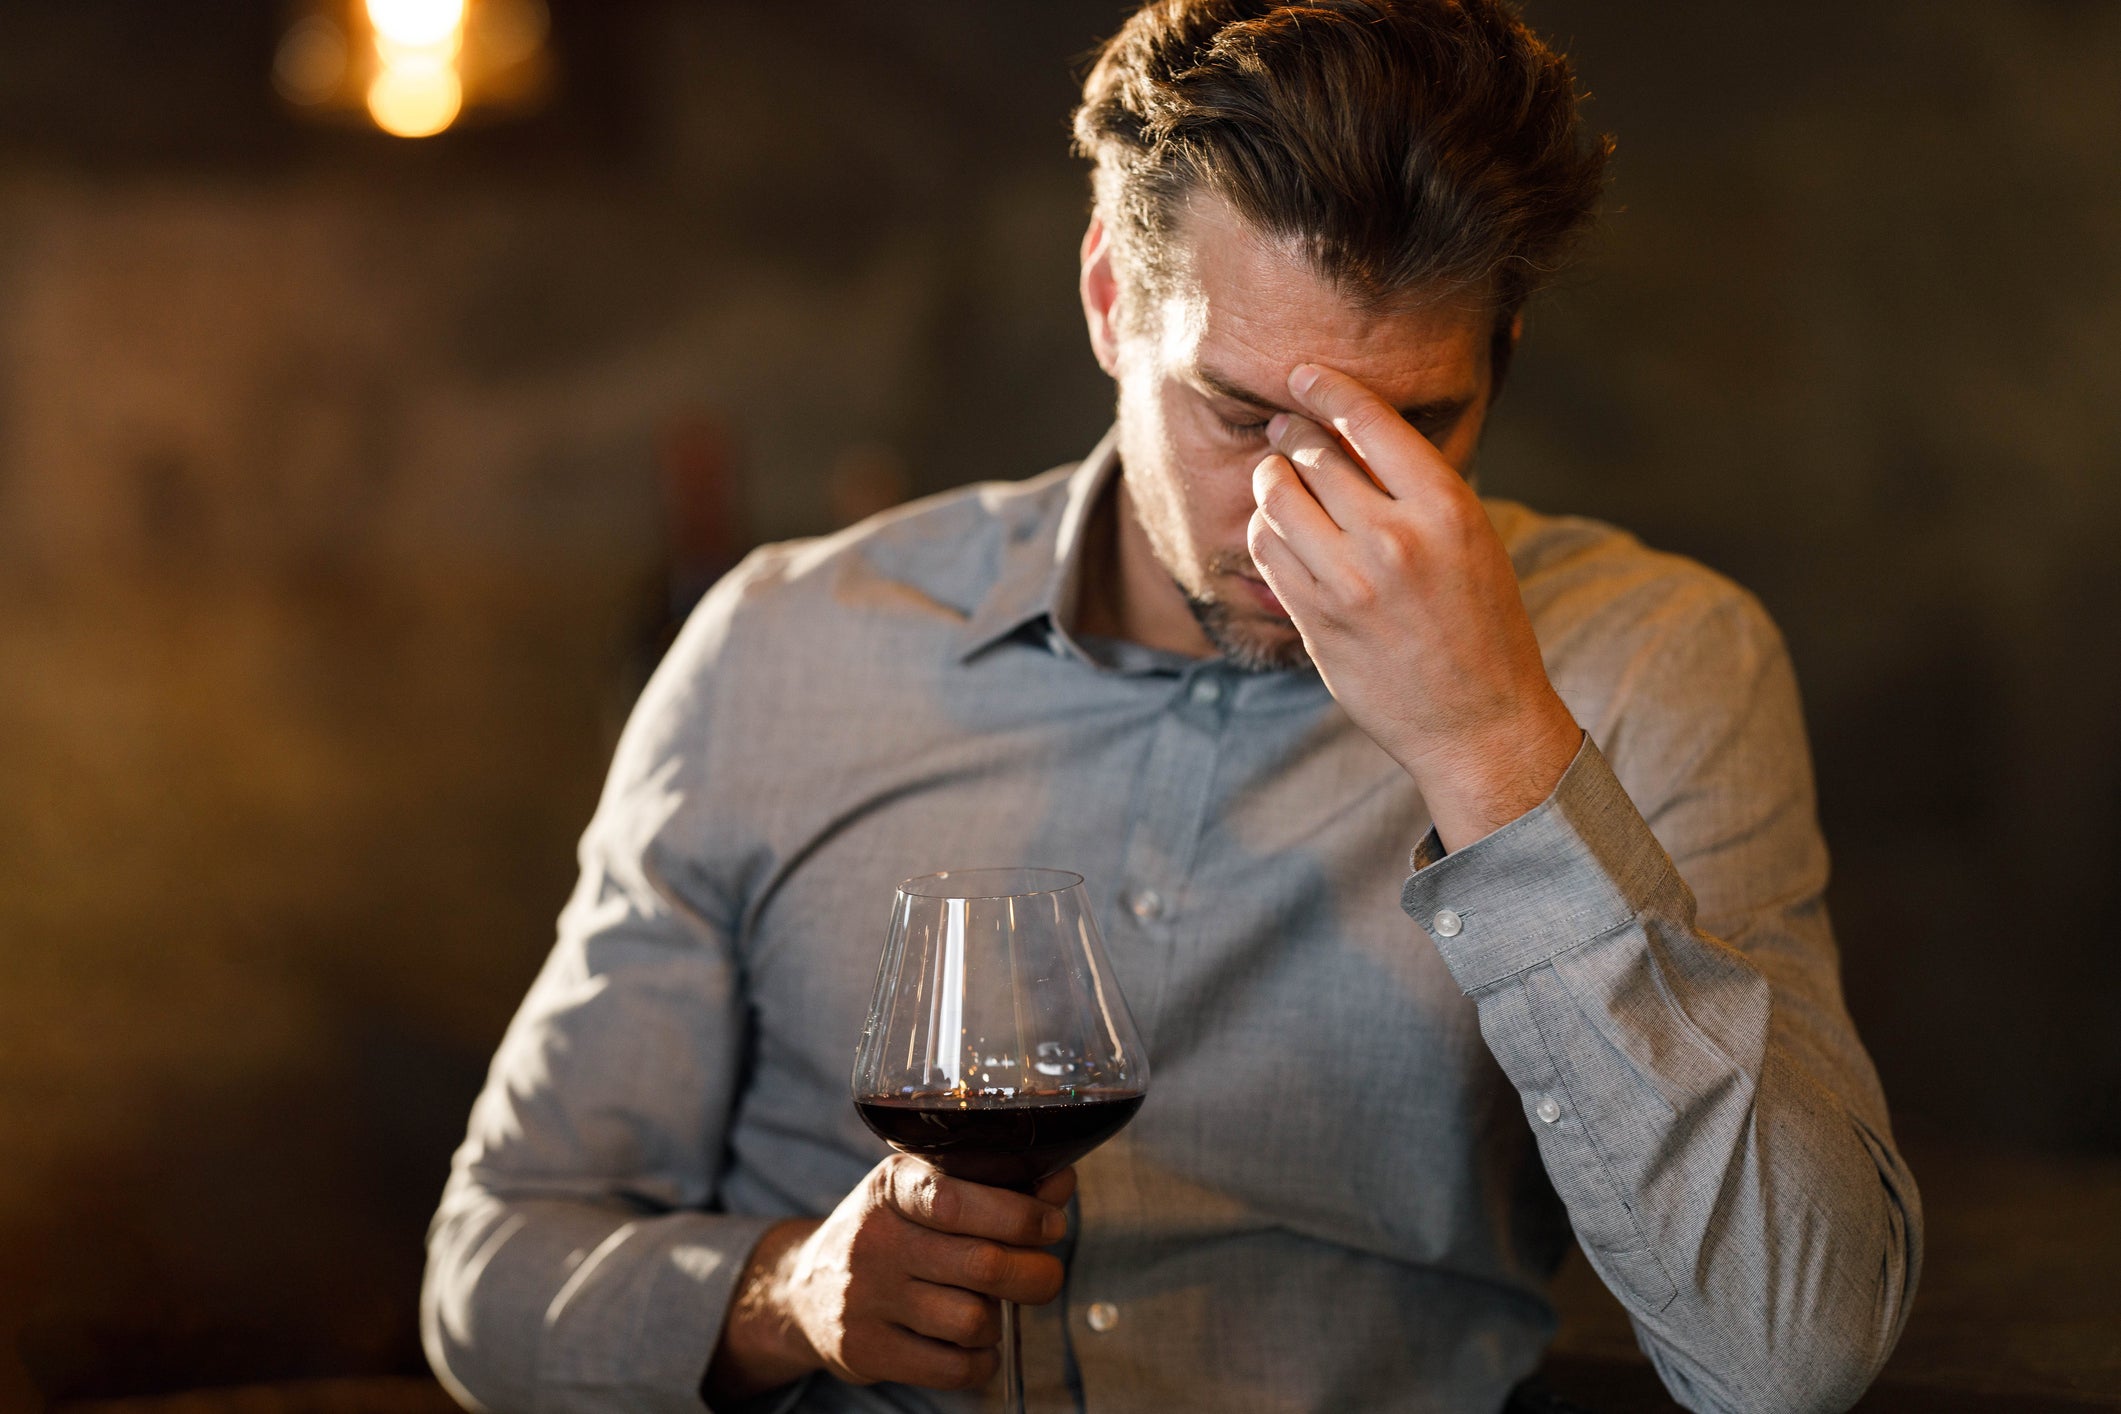 UC Davis scientists theorize that a flavanol found naturally in red wine can interfere with the metabolism of alcohol and cause a “red wine headache.” (Getty)